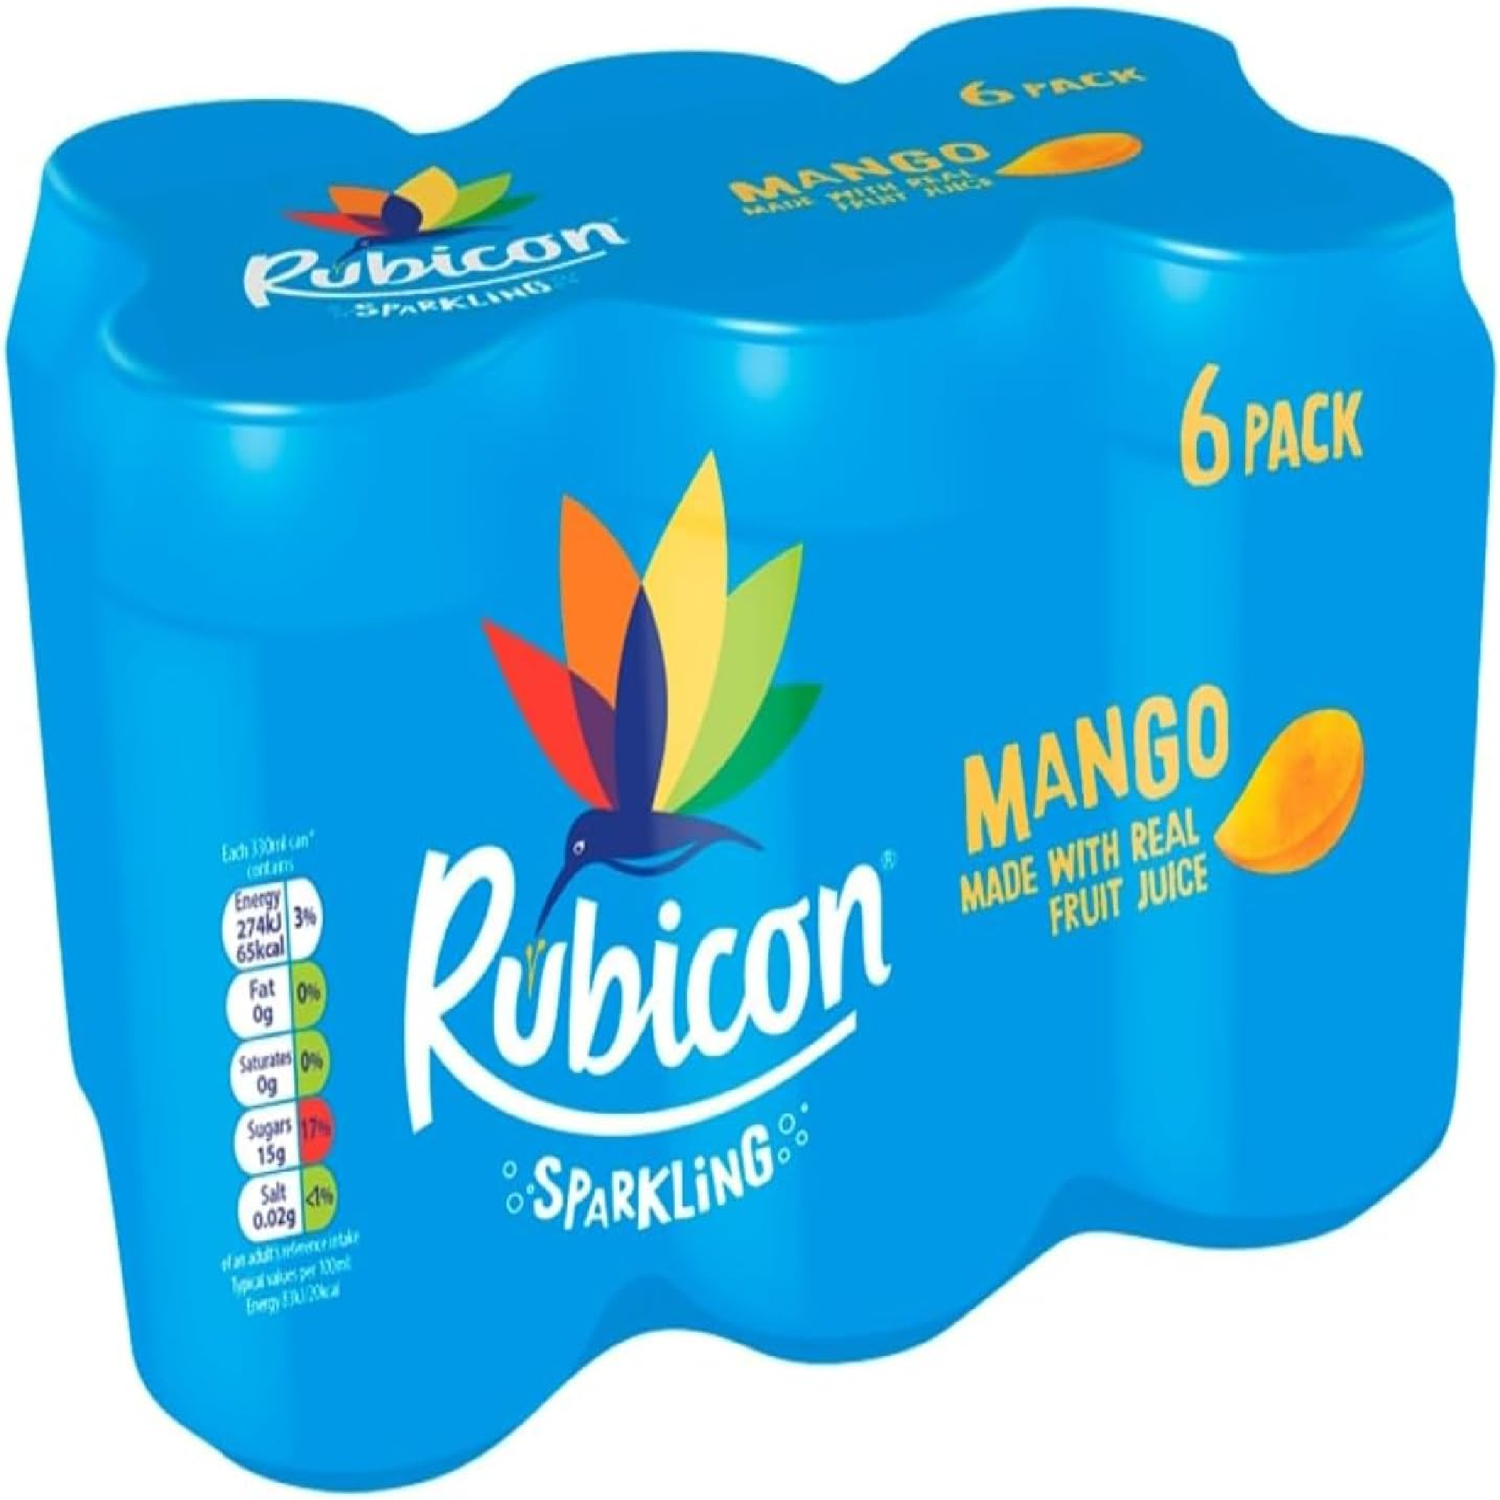 Rubicon Sparkling Drinks 6 Pack